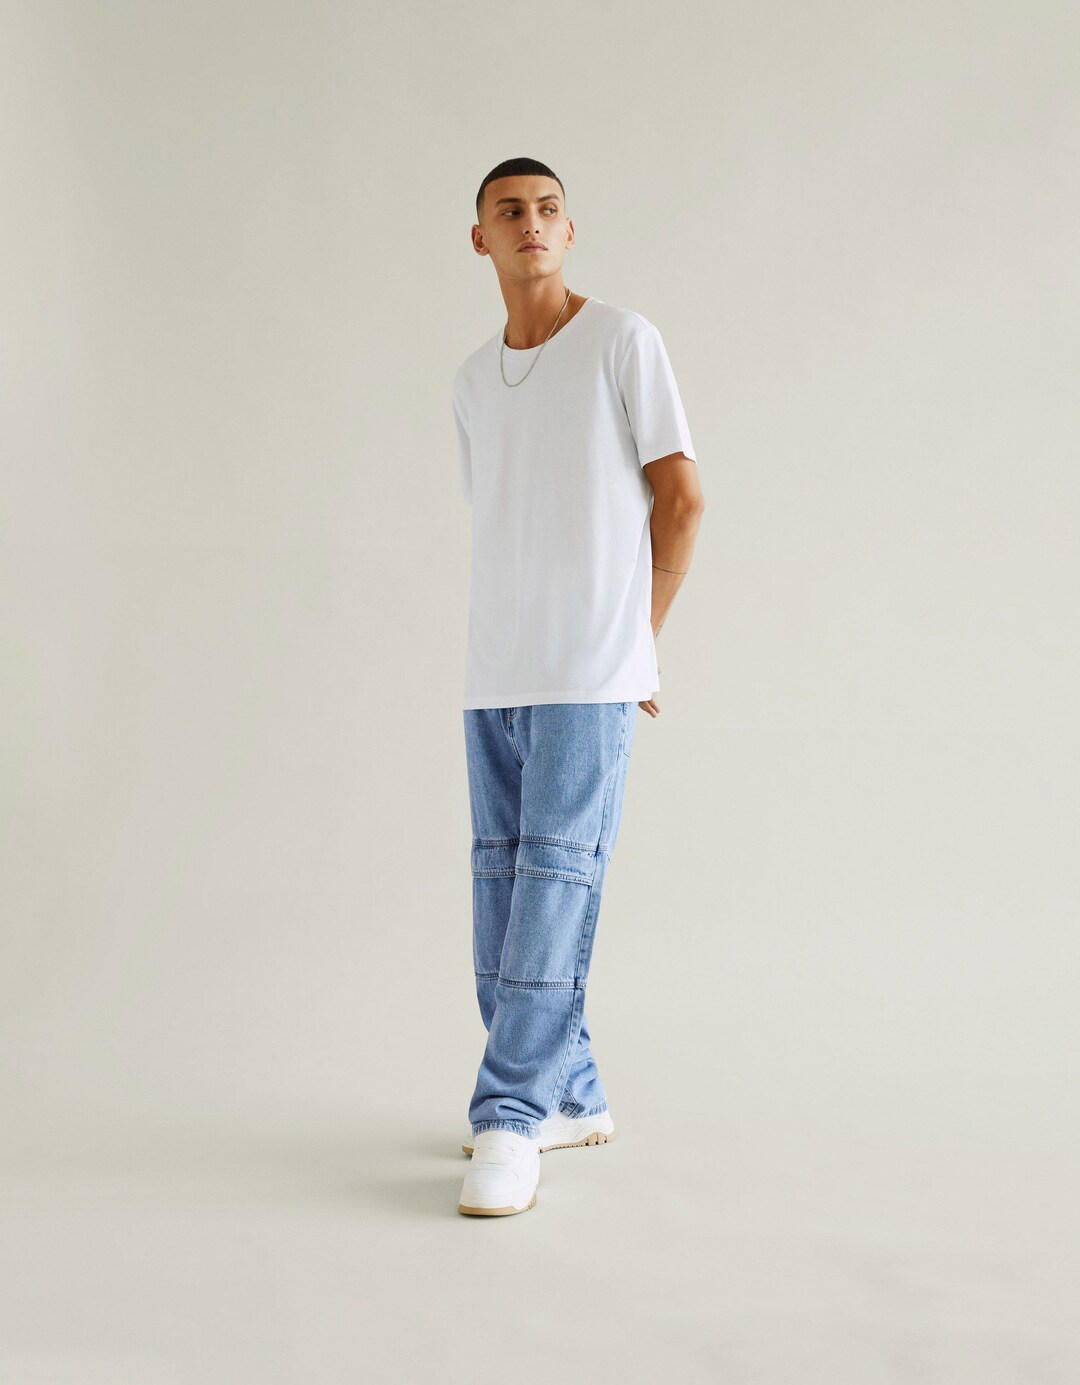 Baggy cargo sweatpant jeans